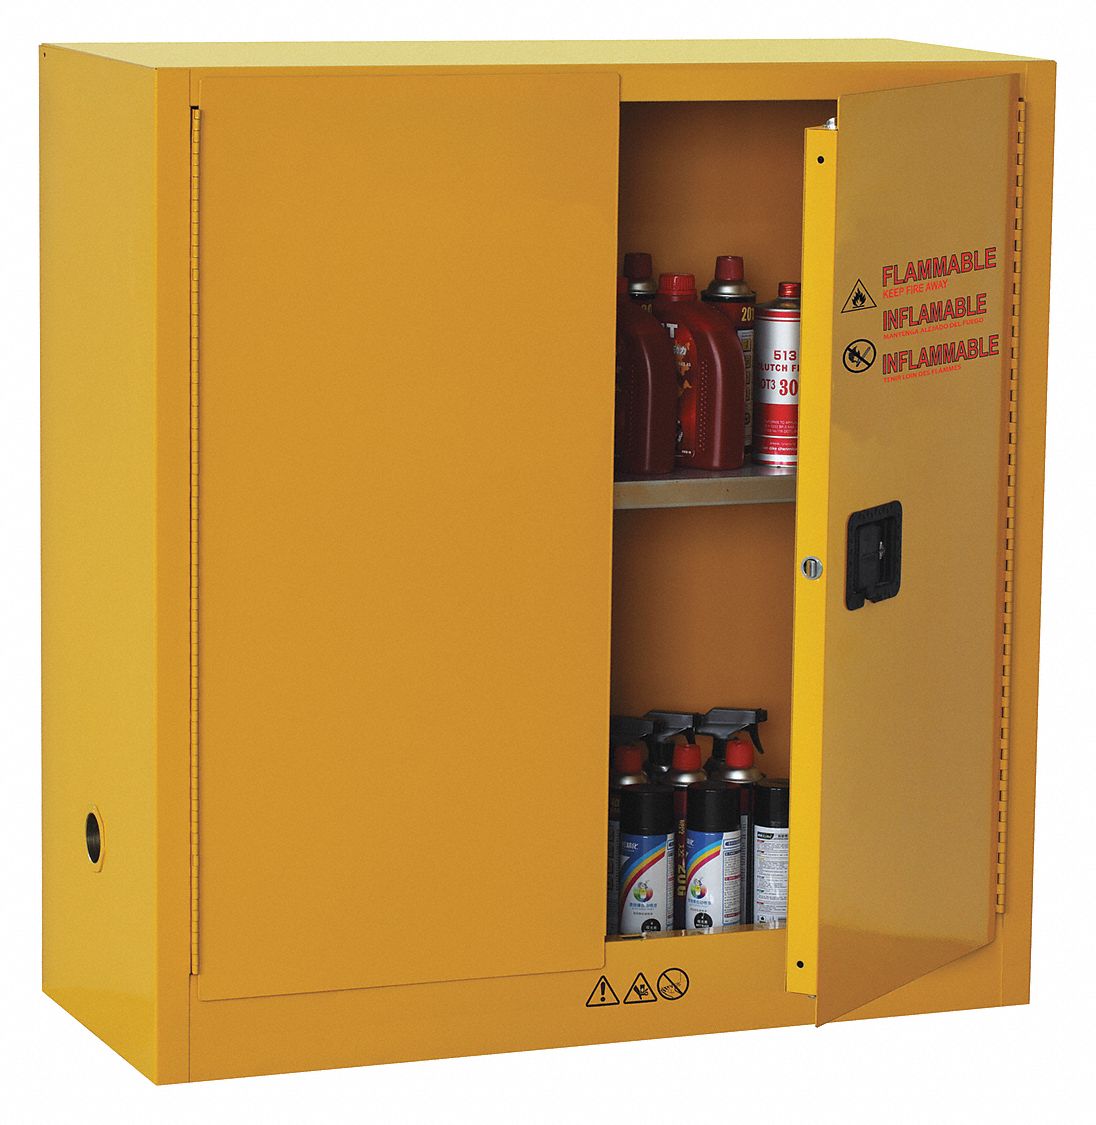 Condor 30 Gal Flammable Cabinet Manual Safety Cabinet Door Type